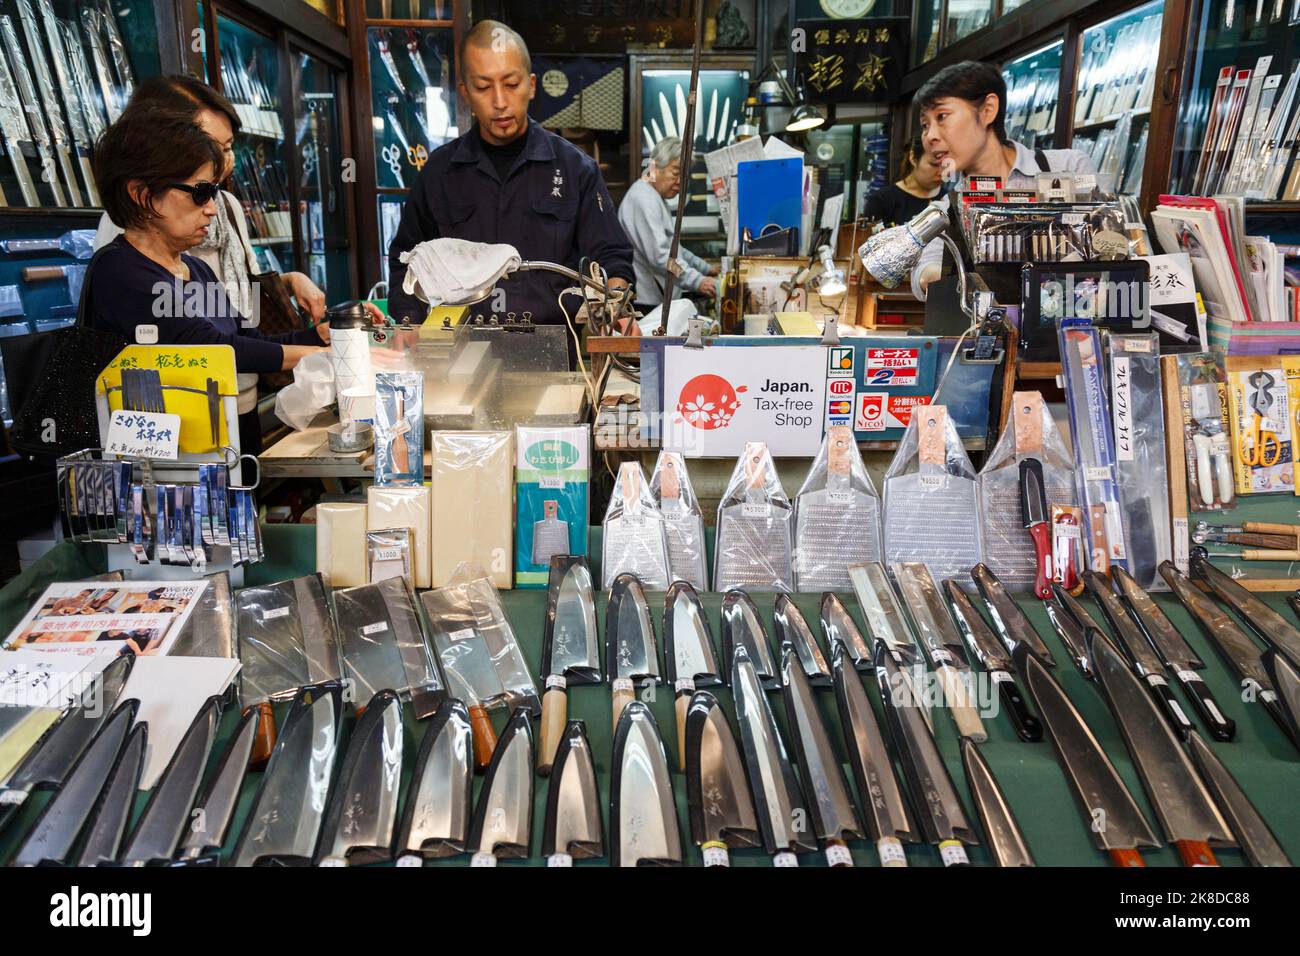 Tokyo, Japan - October 26, 2022 : asian women are buy Japanese high quality traditional kitchen knifes at the local knives shop in Tokyo, Japan. Stock Photo